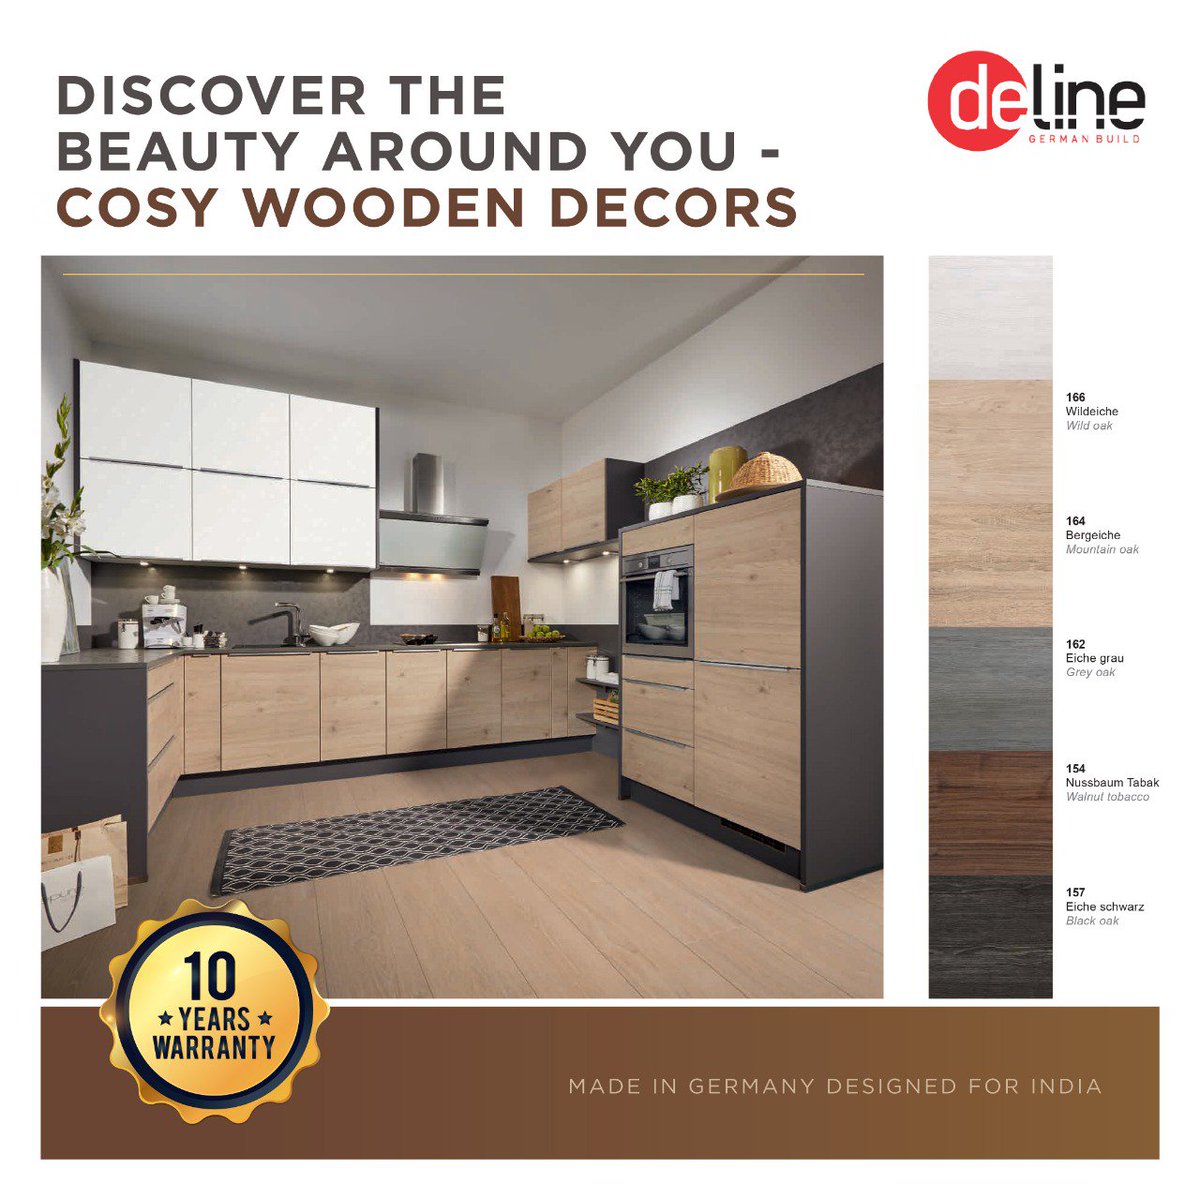 Bring depth and life to the kitchen with Deline's cosy wooden decors where Design and Lifestyle merge harmoniously.#Deline #DelineLiving #DesignsOfFuture #FurnitureDesign #ModernHome ##FuturisticLiving #ModernLiving #Kitchen #ModularKitchens #KitchenAccessories #Cabinets